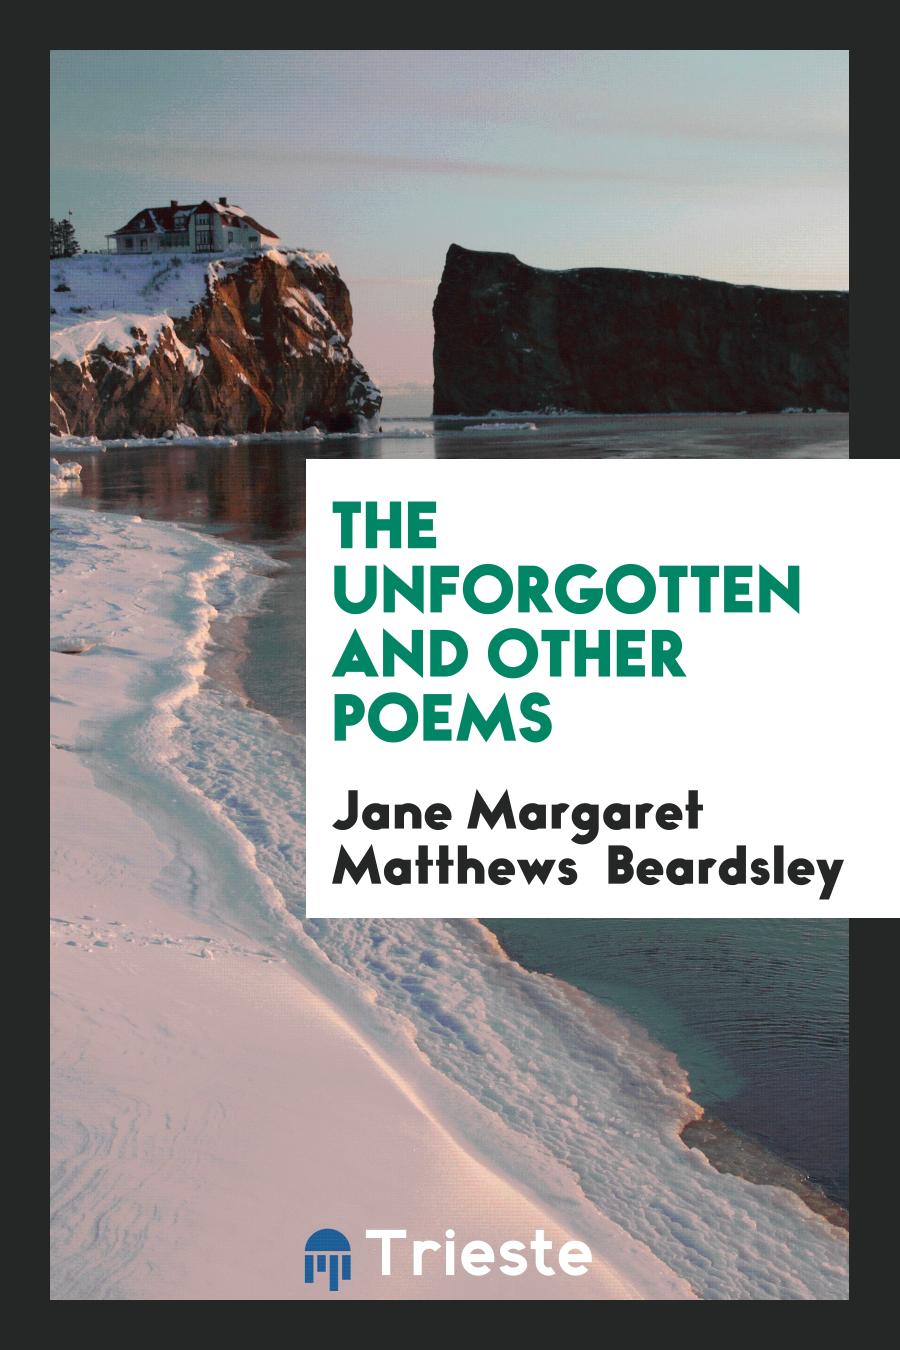 The Unforgotten and Other Poems